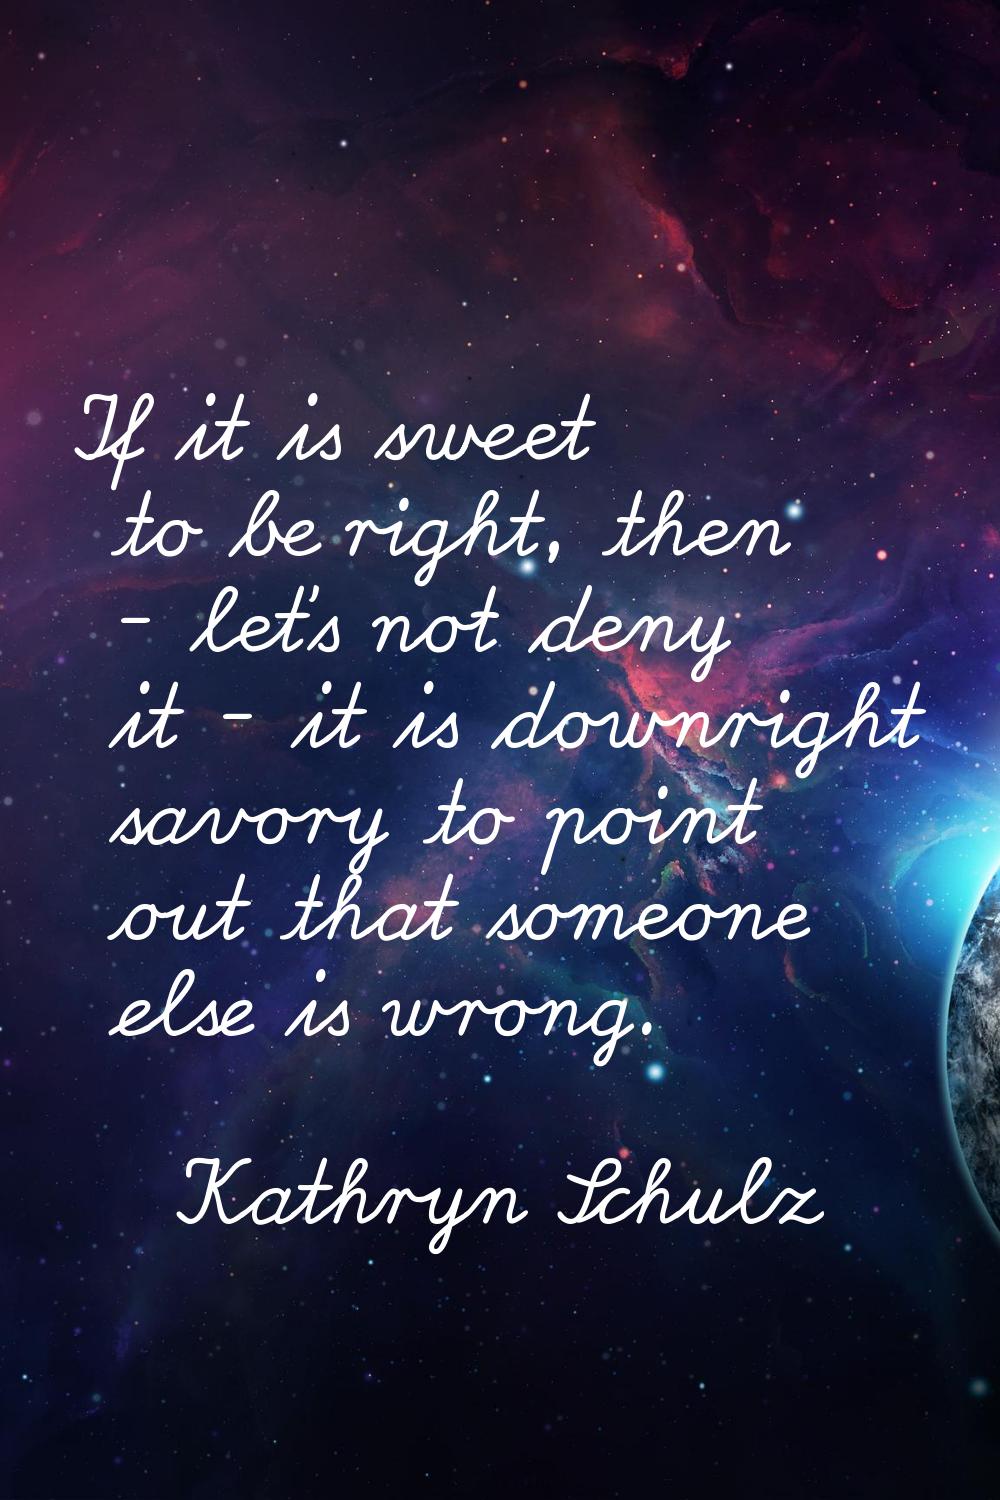 If it is sweet to be right, then - let's not deny it - it is downright savory to point out that som